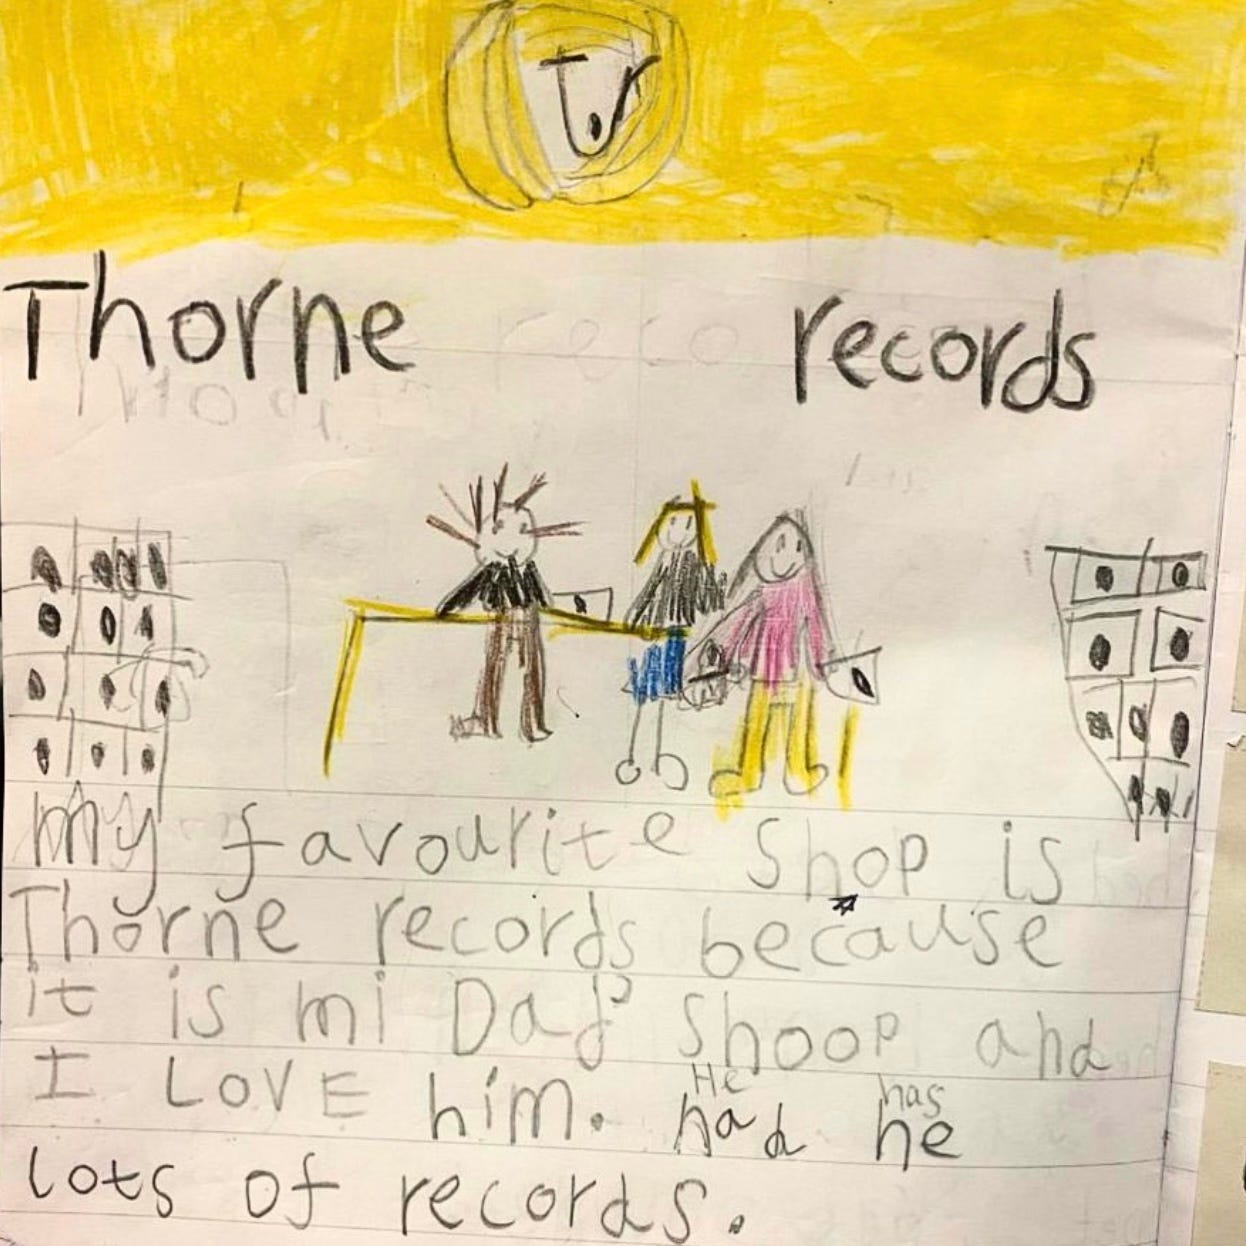 a kids drawing that says my favourite shop is thorne records because it is my dads shop and i love him he has a lot of records